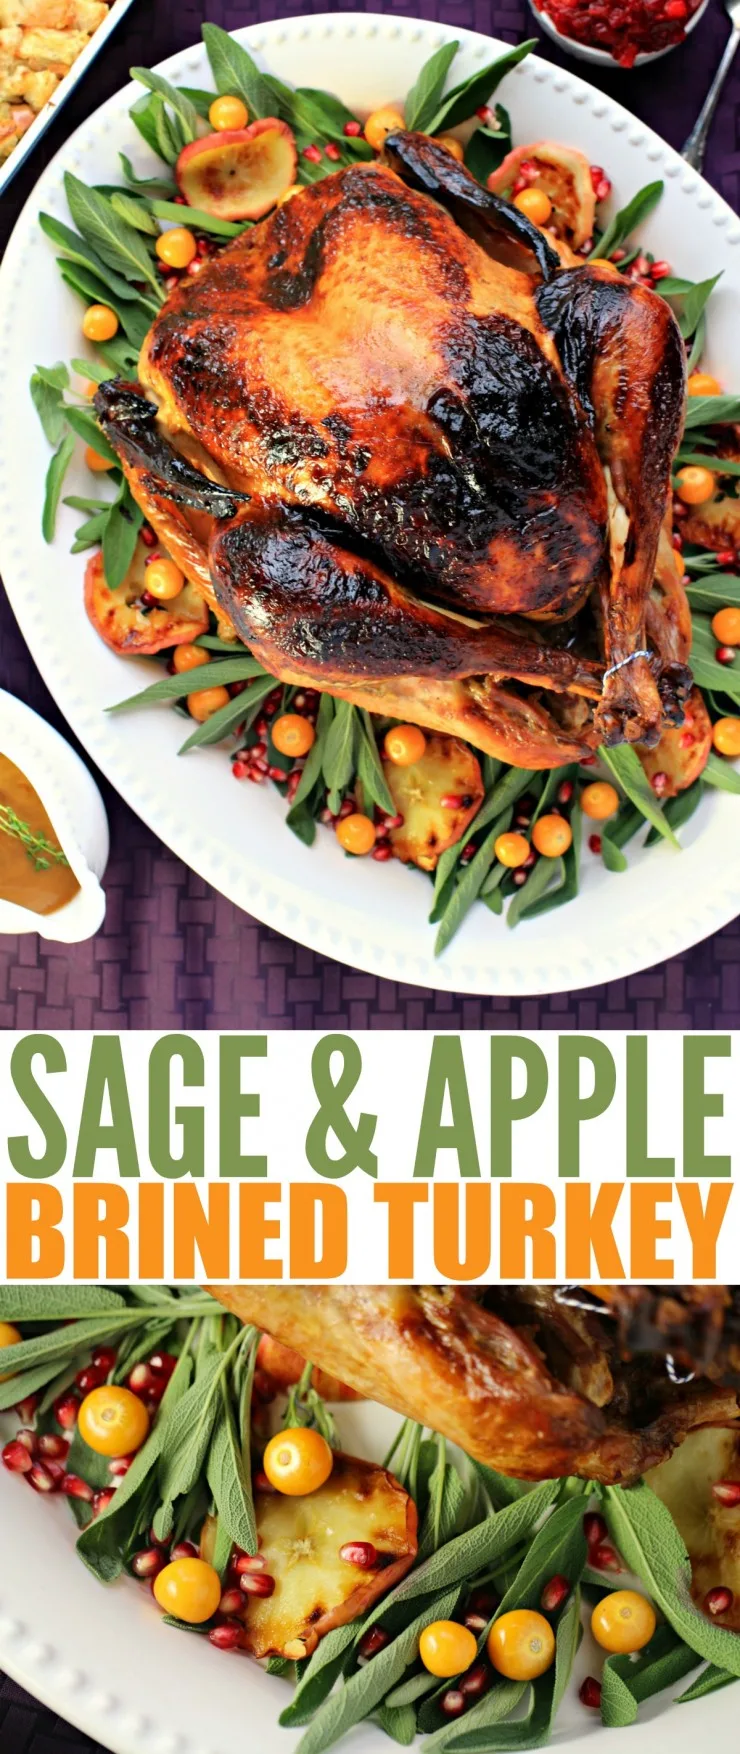 Enjoy this Sage & Apple Brined Turkey for Thanksgiving dinner this year. This brined turkey is perfectly moist and flavoured with sage and apples - a quintessentially autumn flavour pairing.